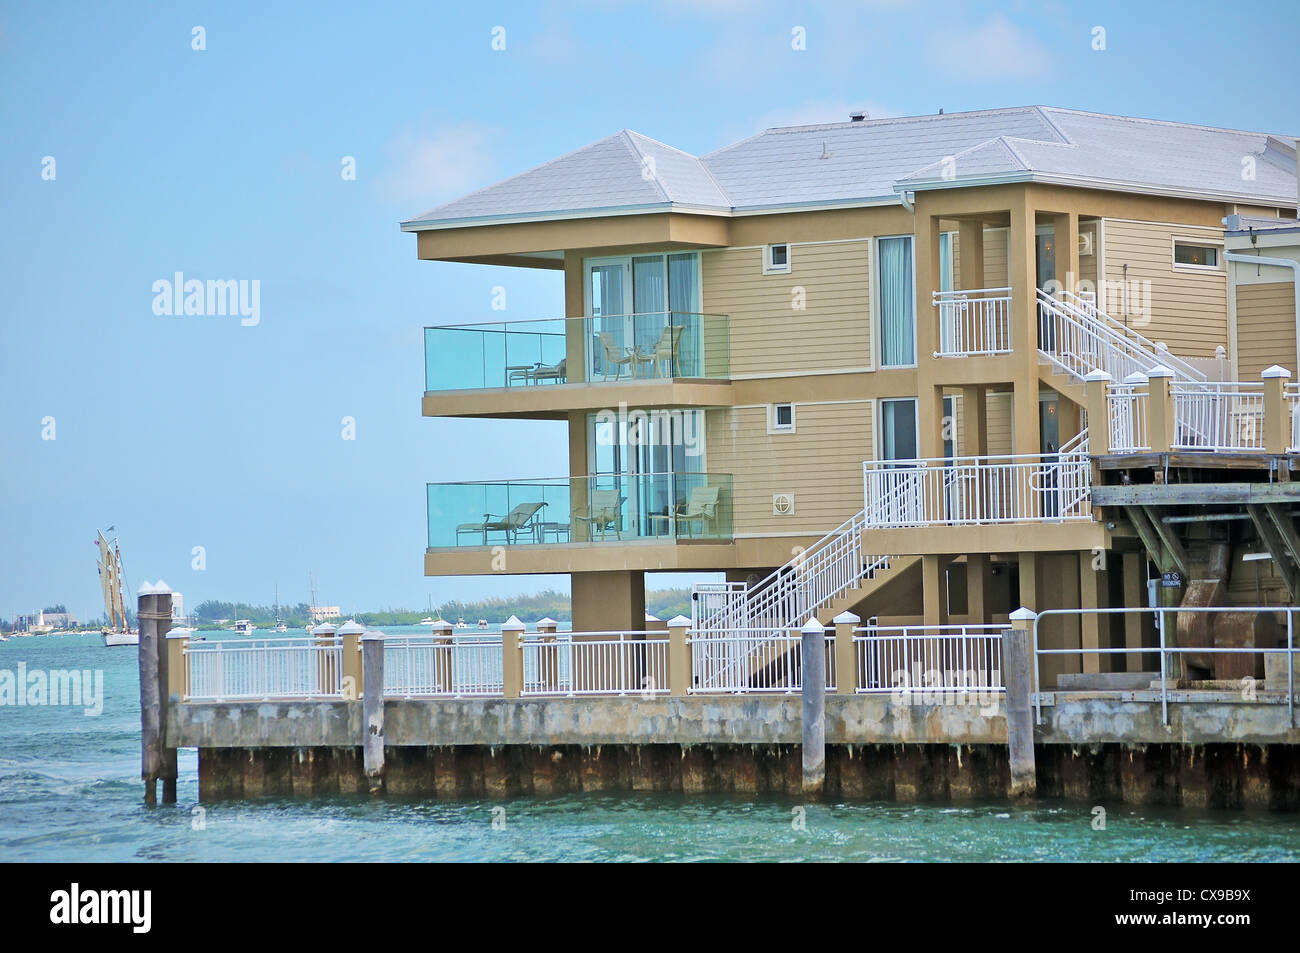 A large modern style new home along the ocean. Stock Photo